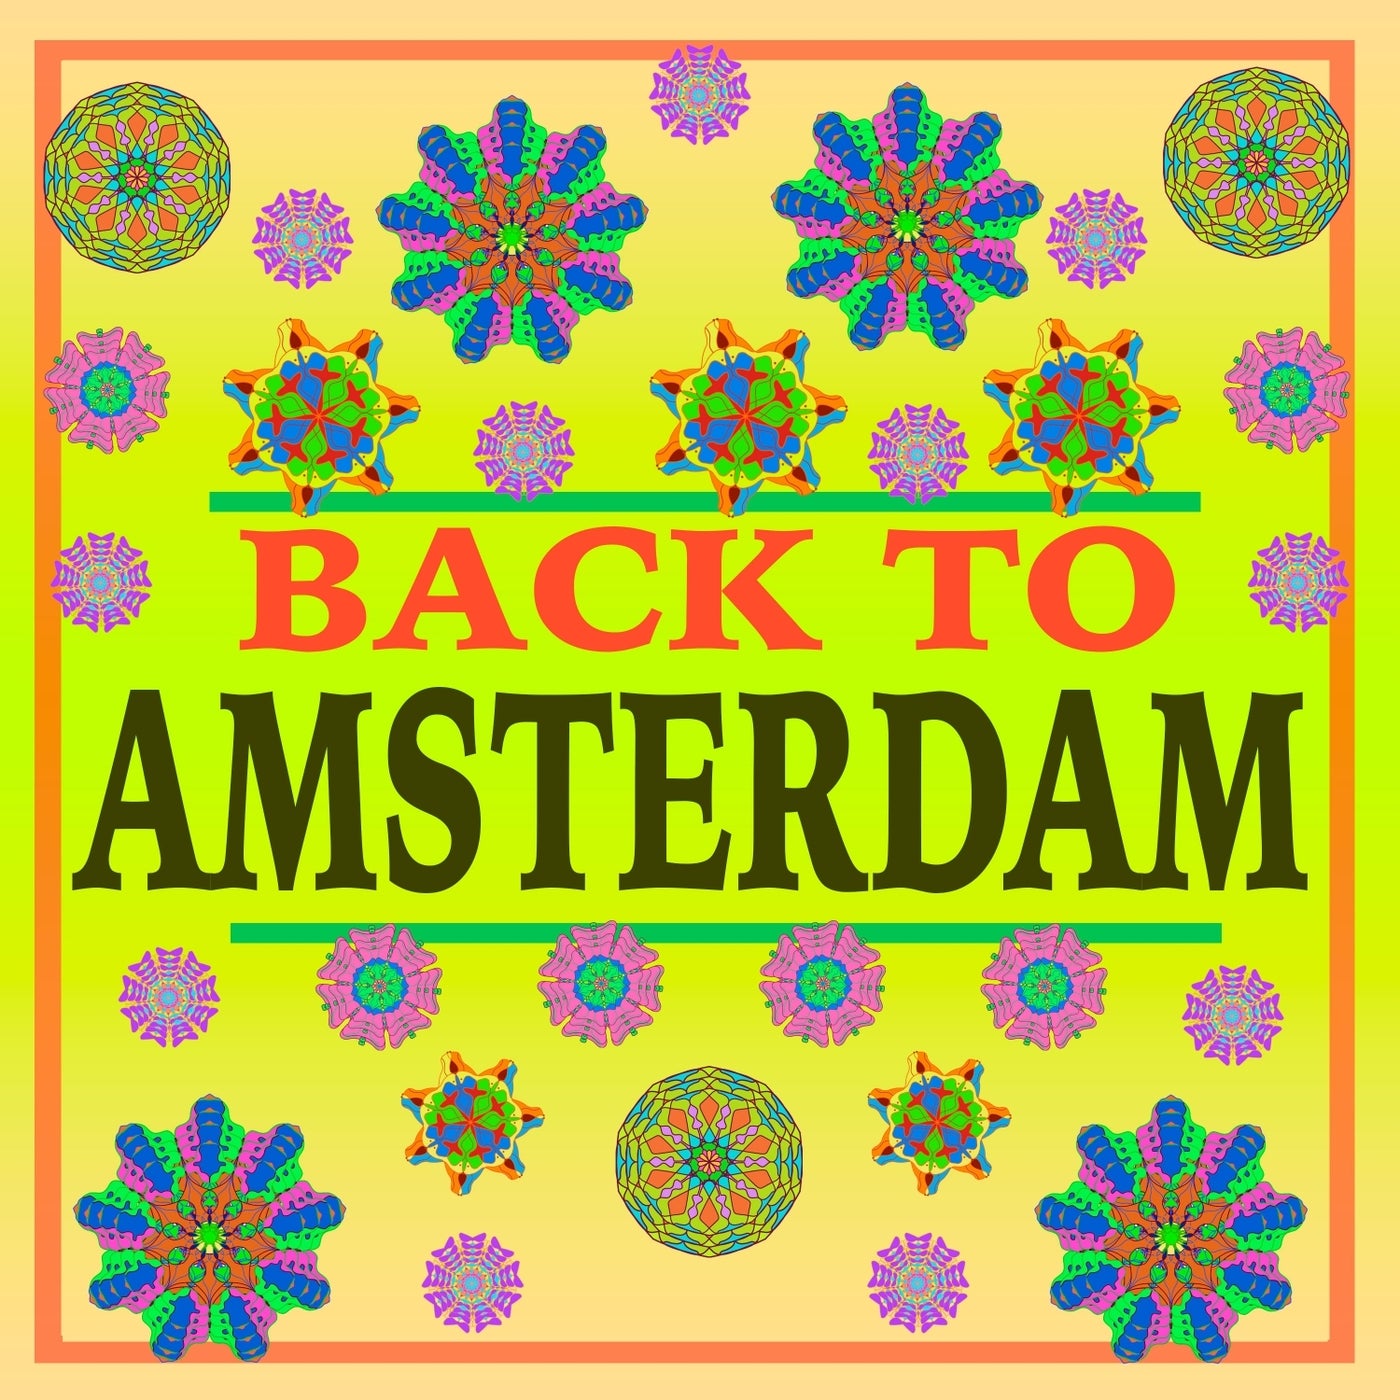 Back to Amsterdam